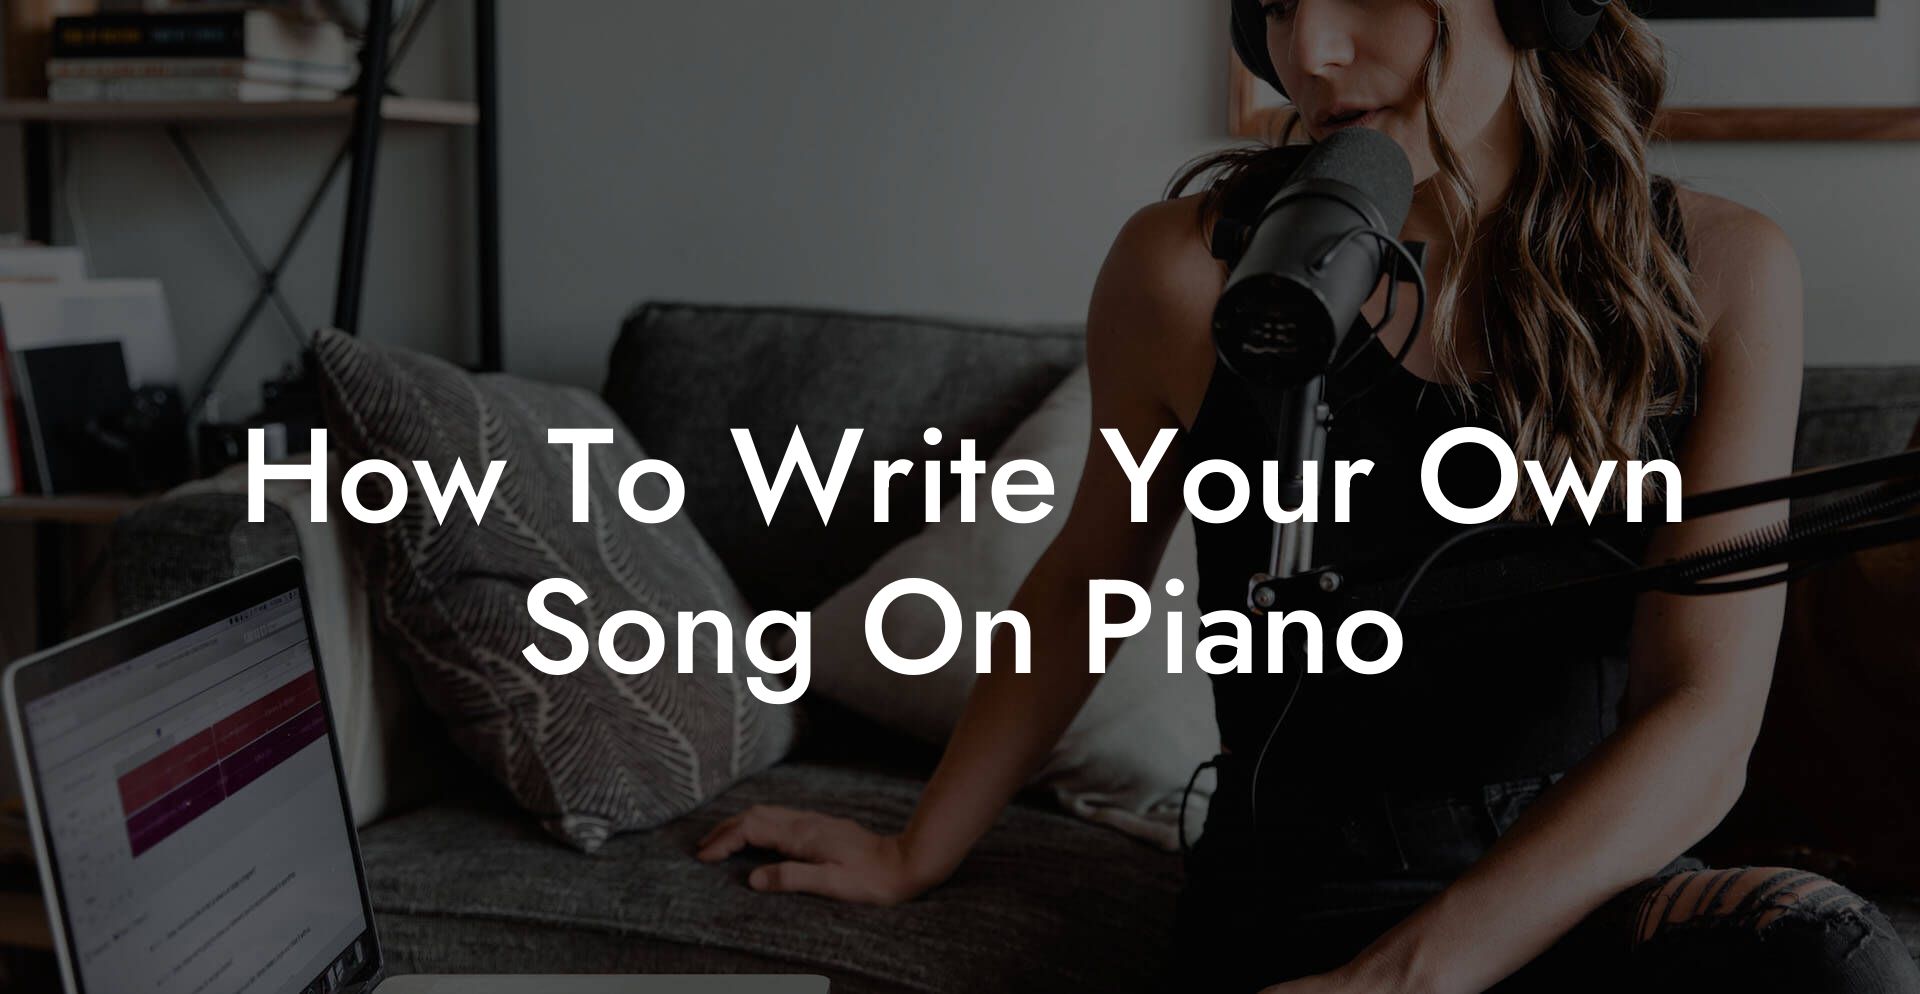 how to write your own song on piano lyric assistant